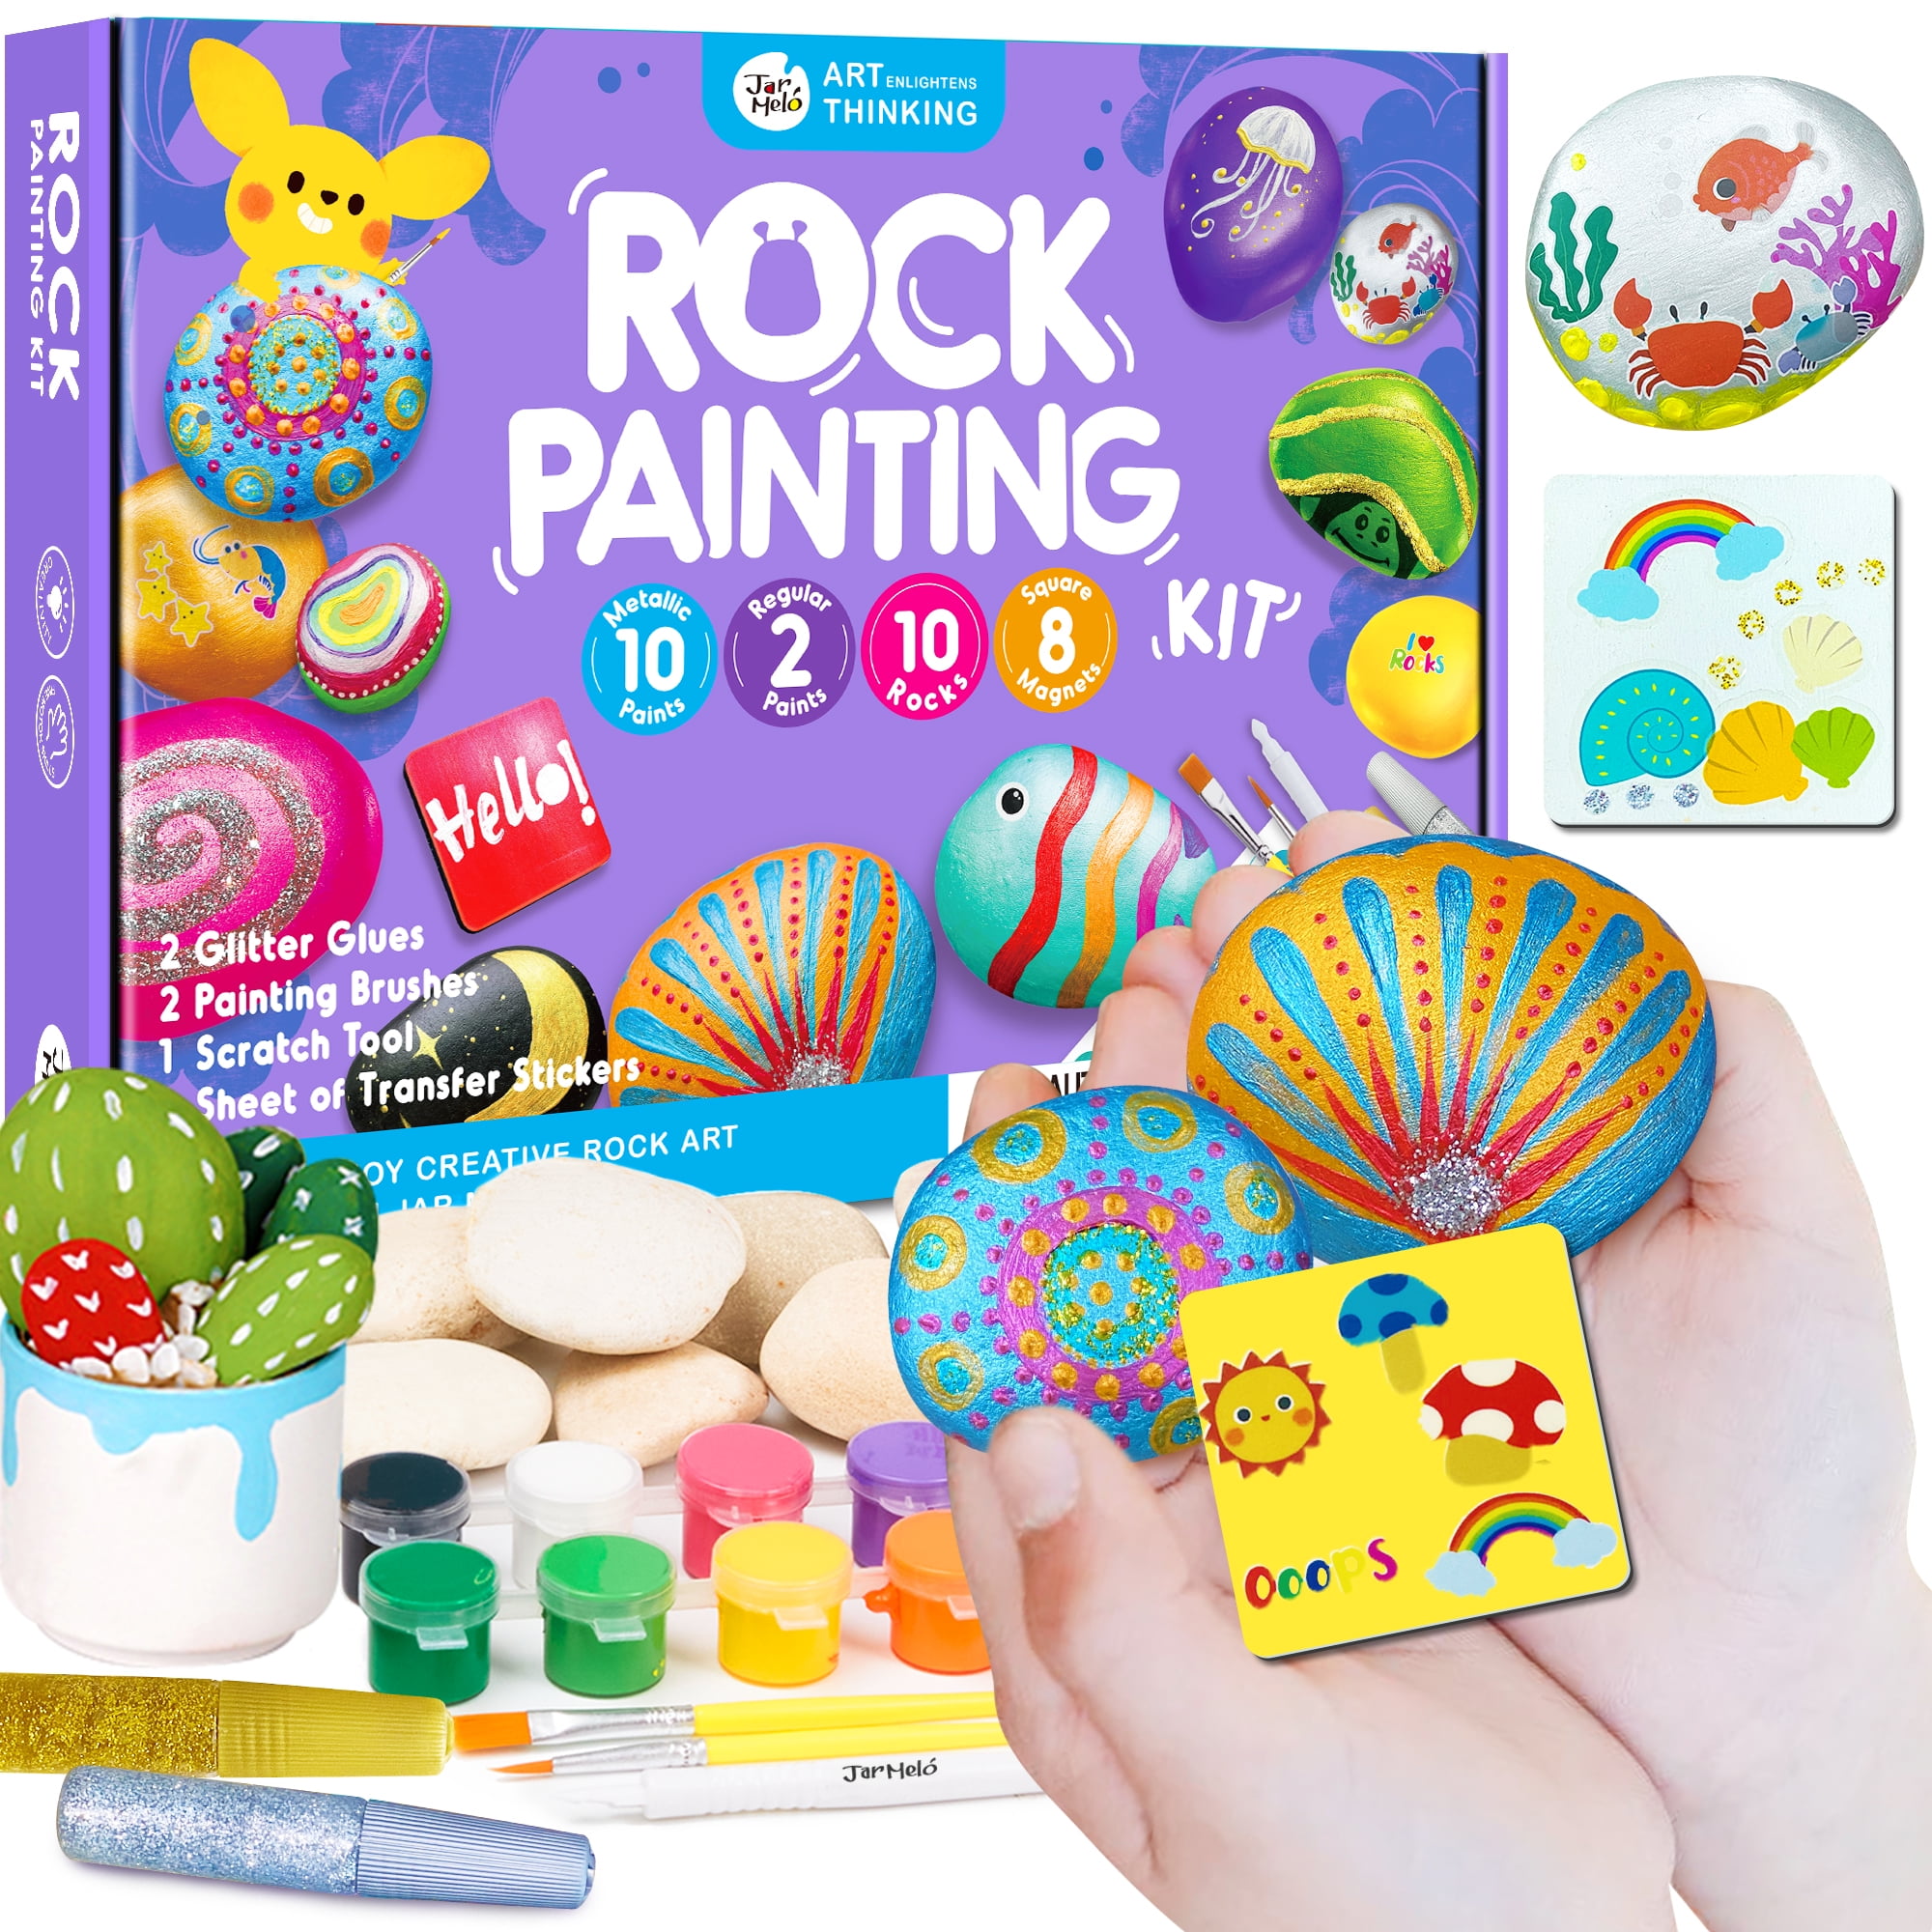 JOYIN 12 Rock Painting Kit & 13 Wooden Magnet Painting Kit, Arts and Crafts  for Kids Ages 6-8+, Art Supplies with Various Paints, Craft Paint Kits